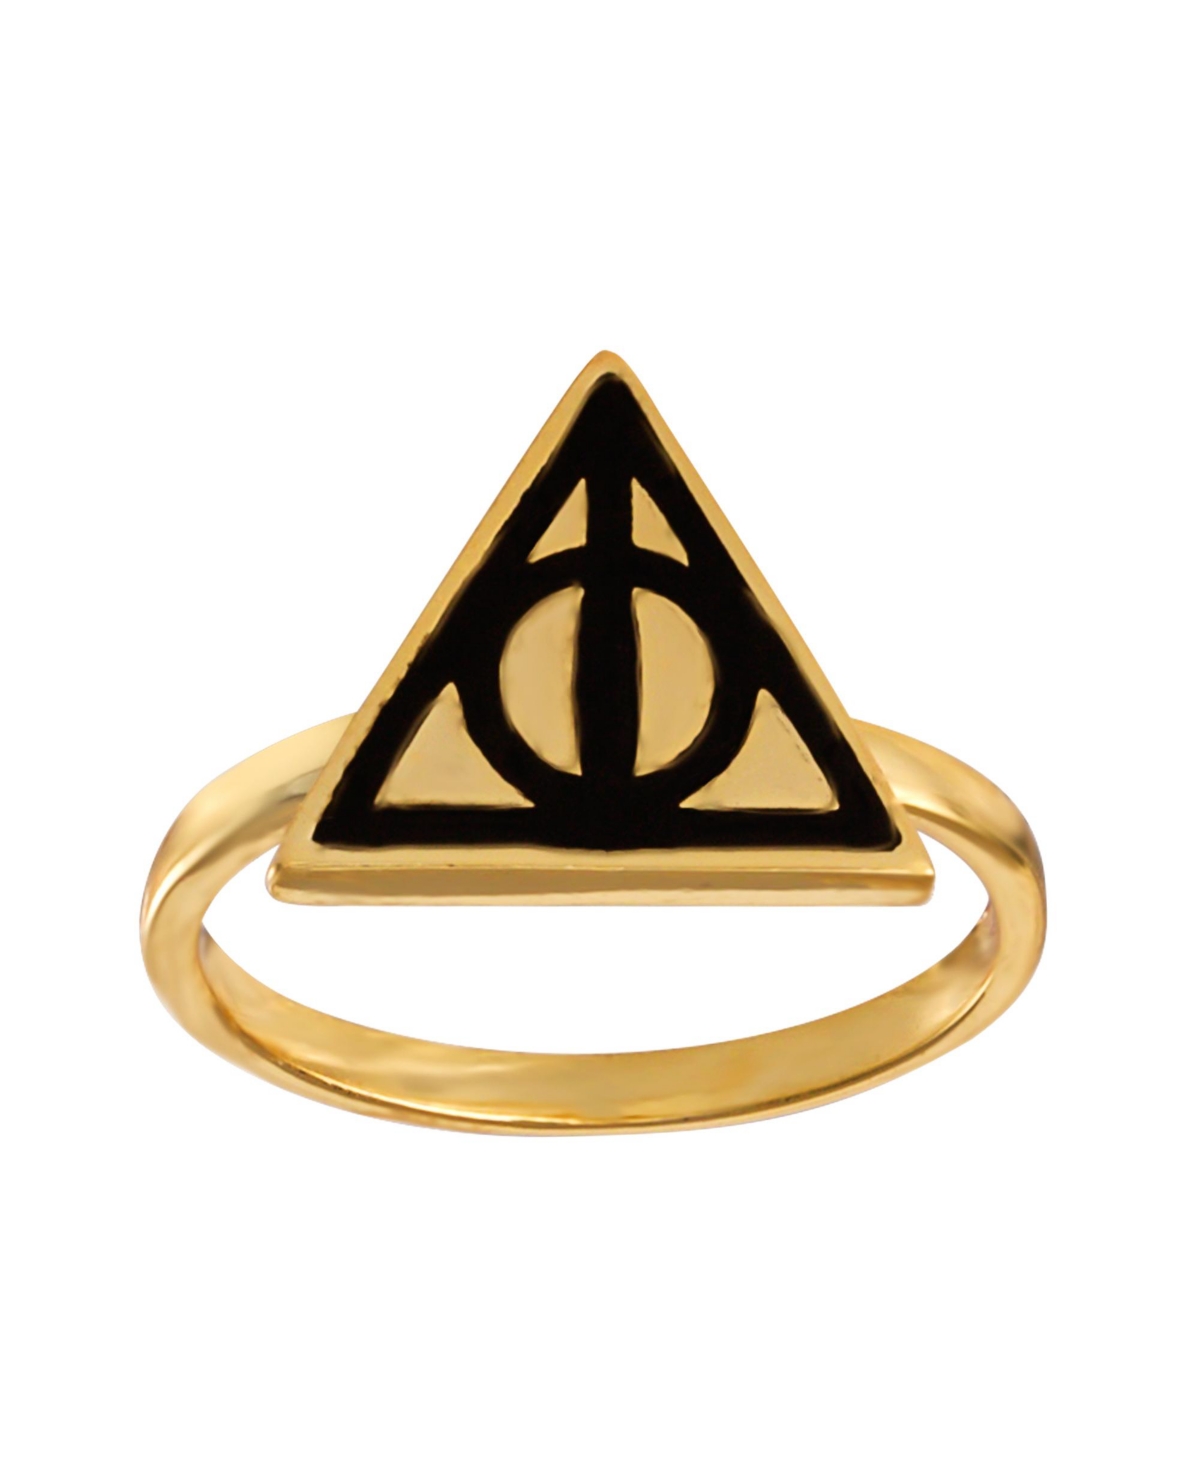 Womens 18K Yellow Gold Plated Deathly Hallows Ring - Silver tone and gold tone